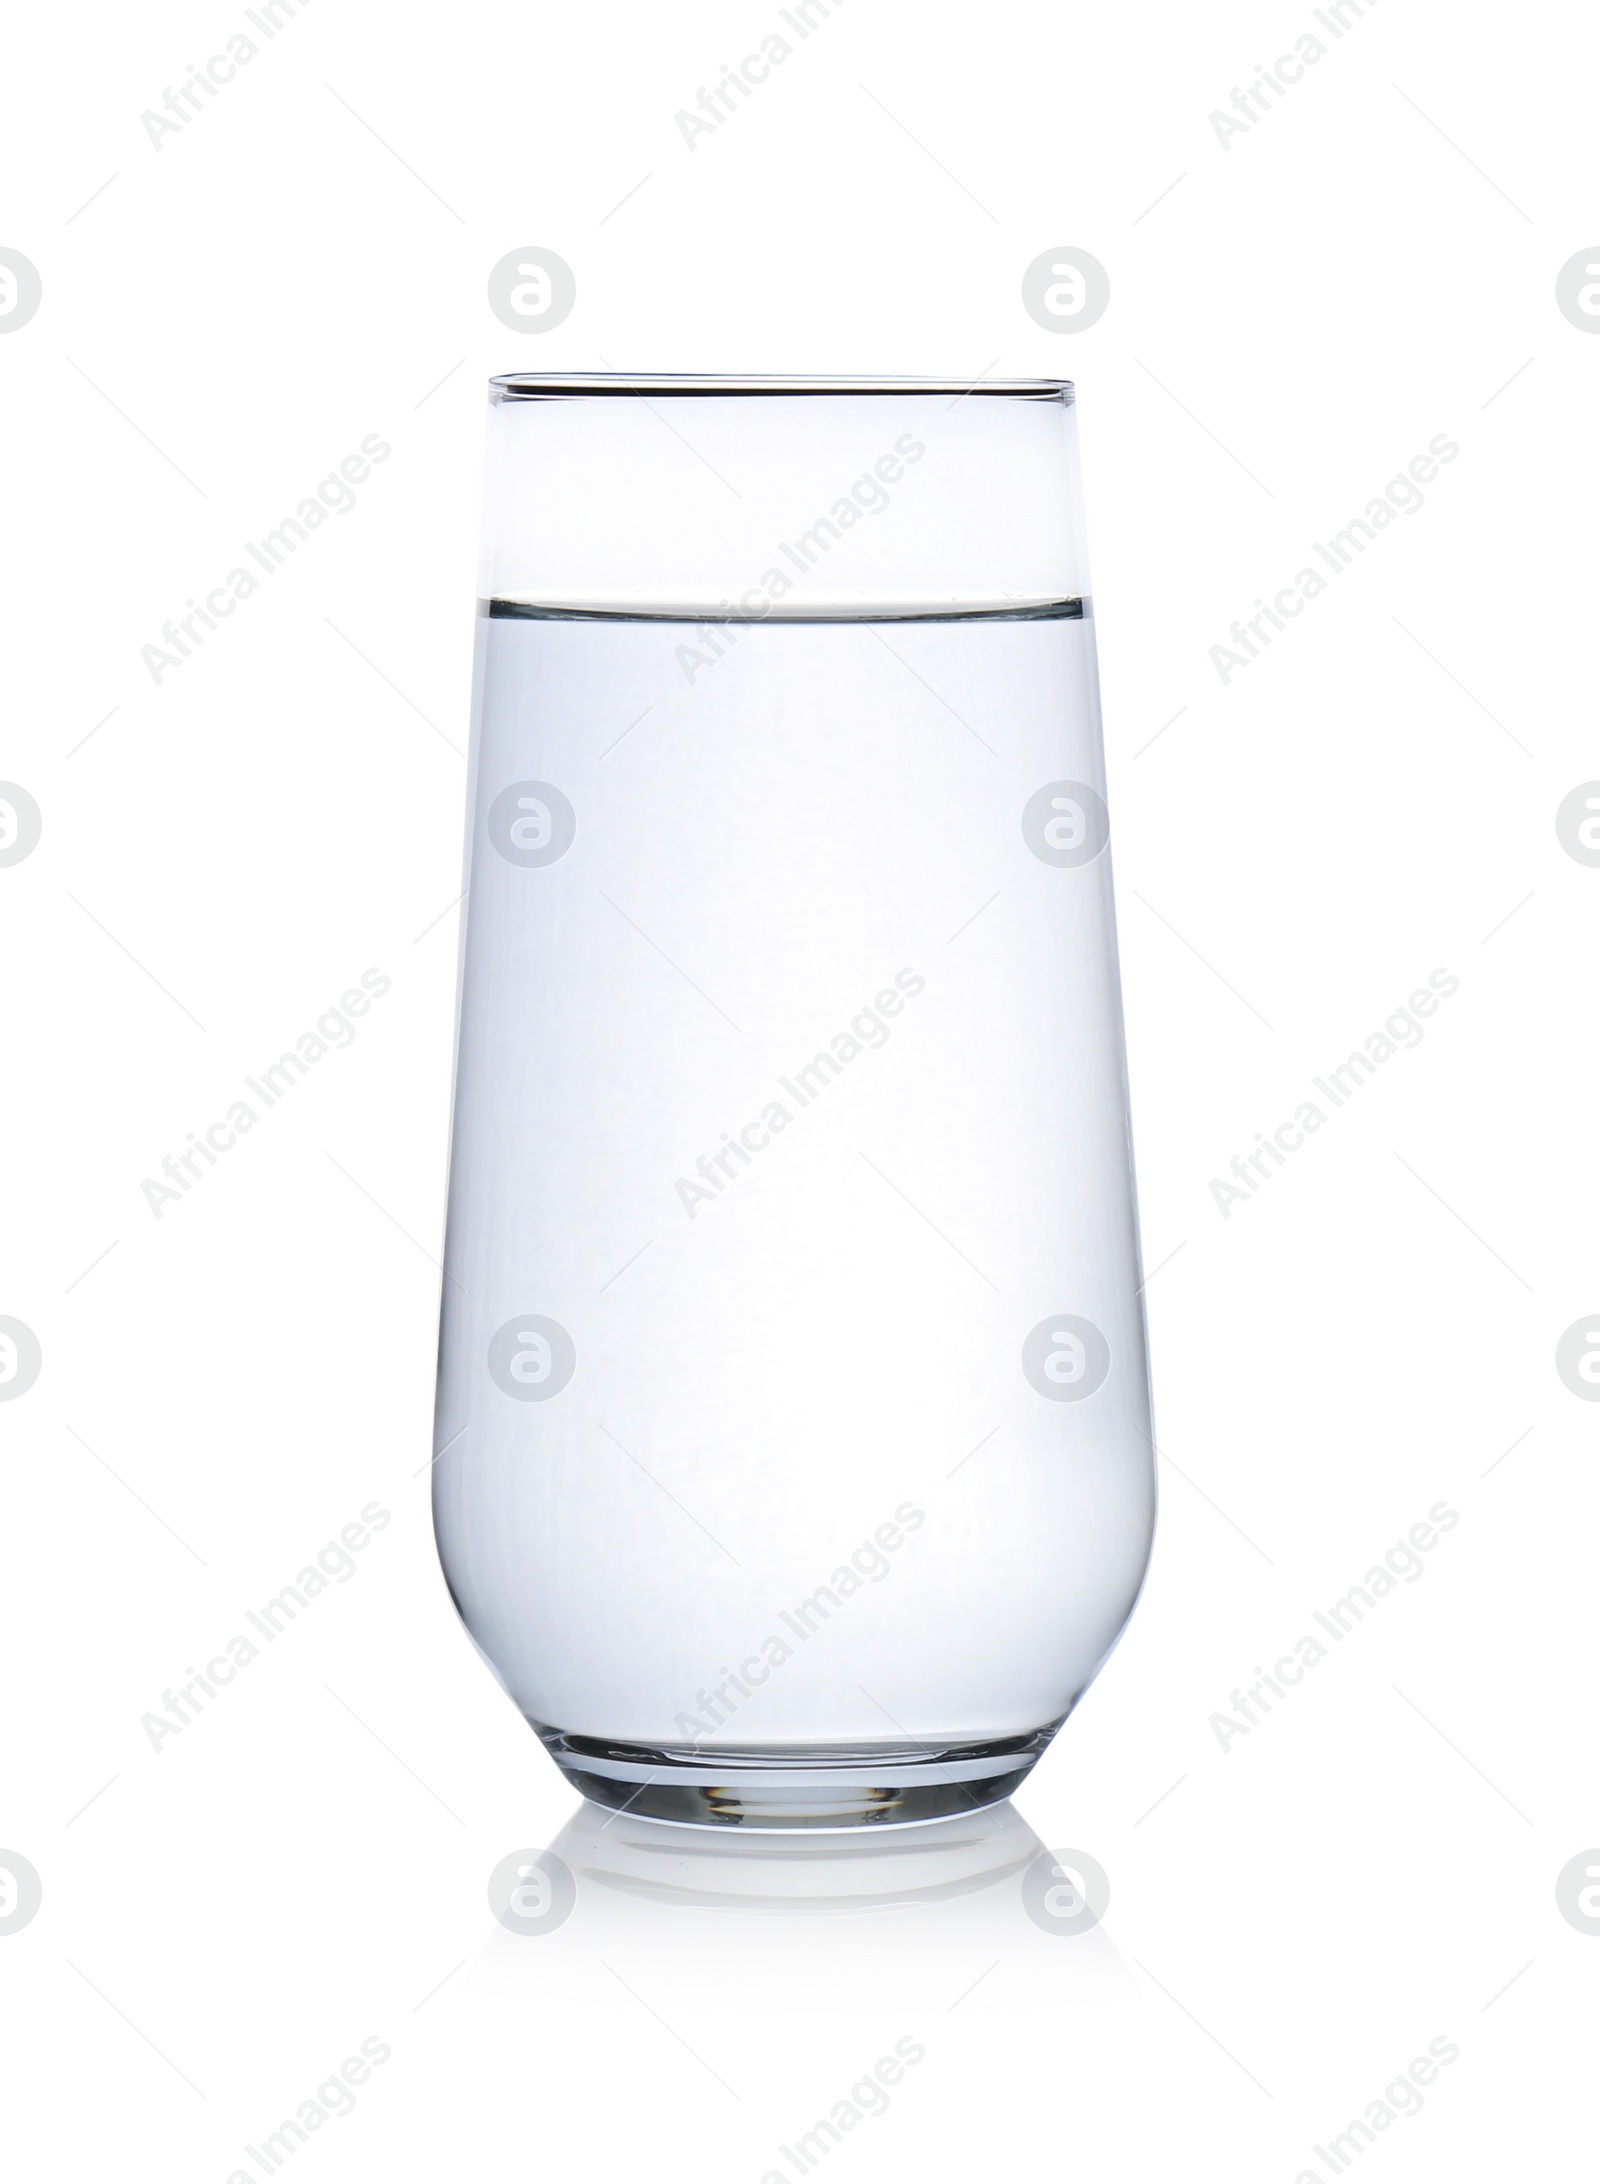 Photo of Full glass of water on white background